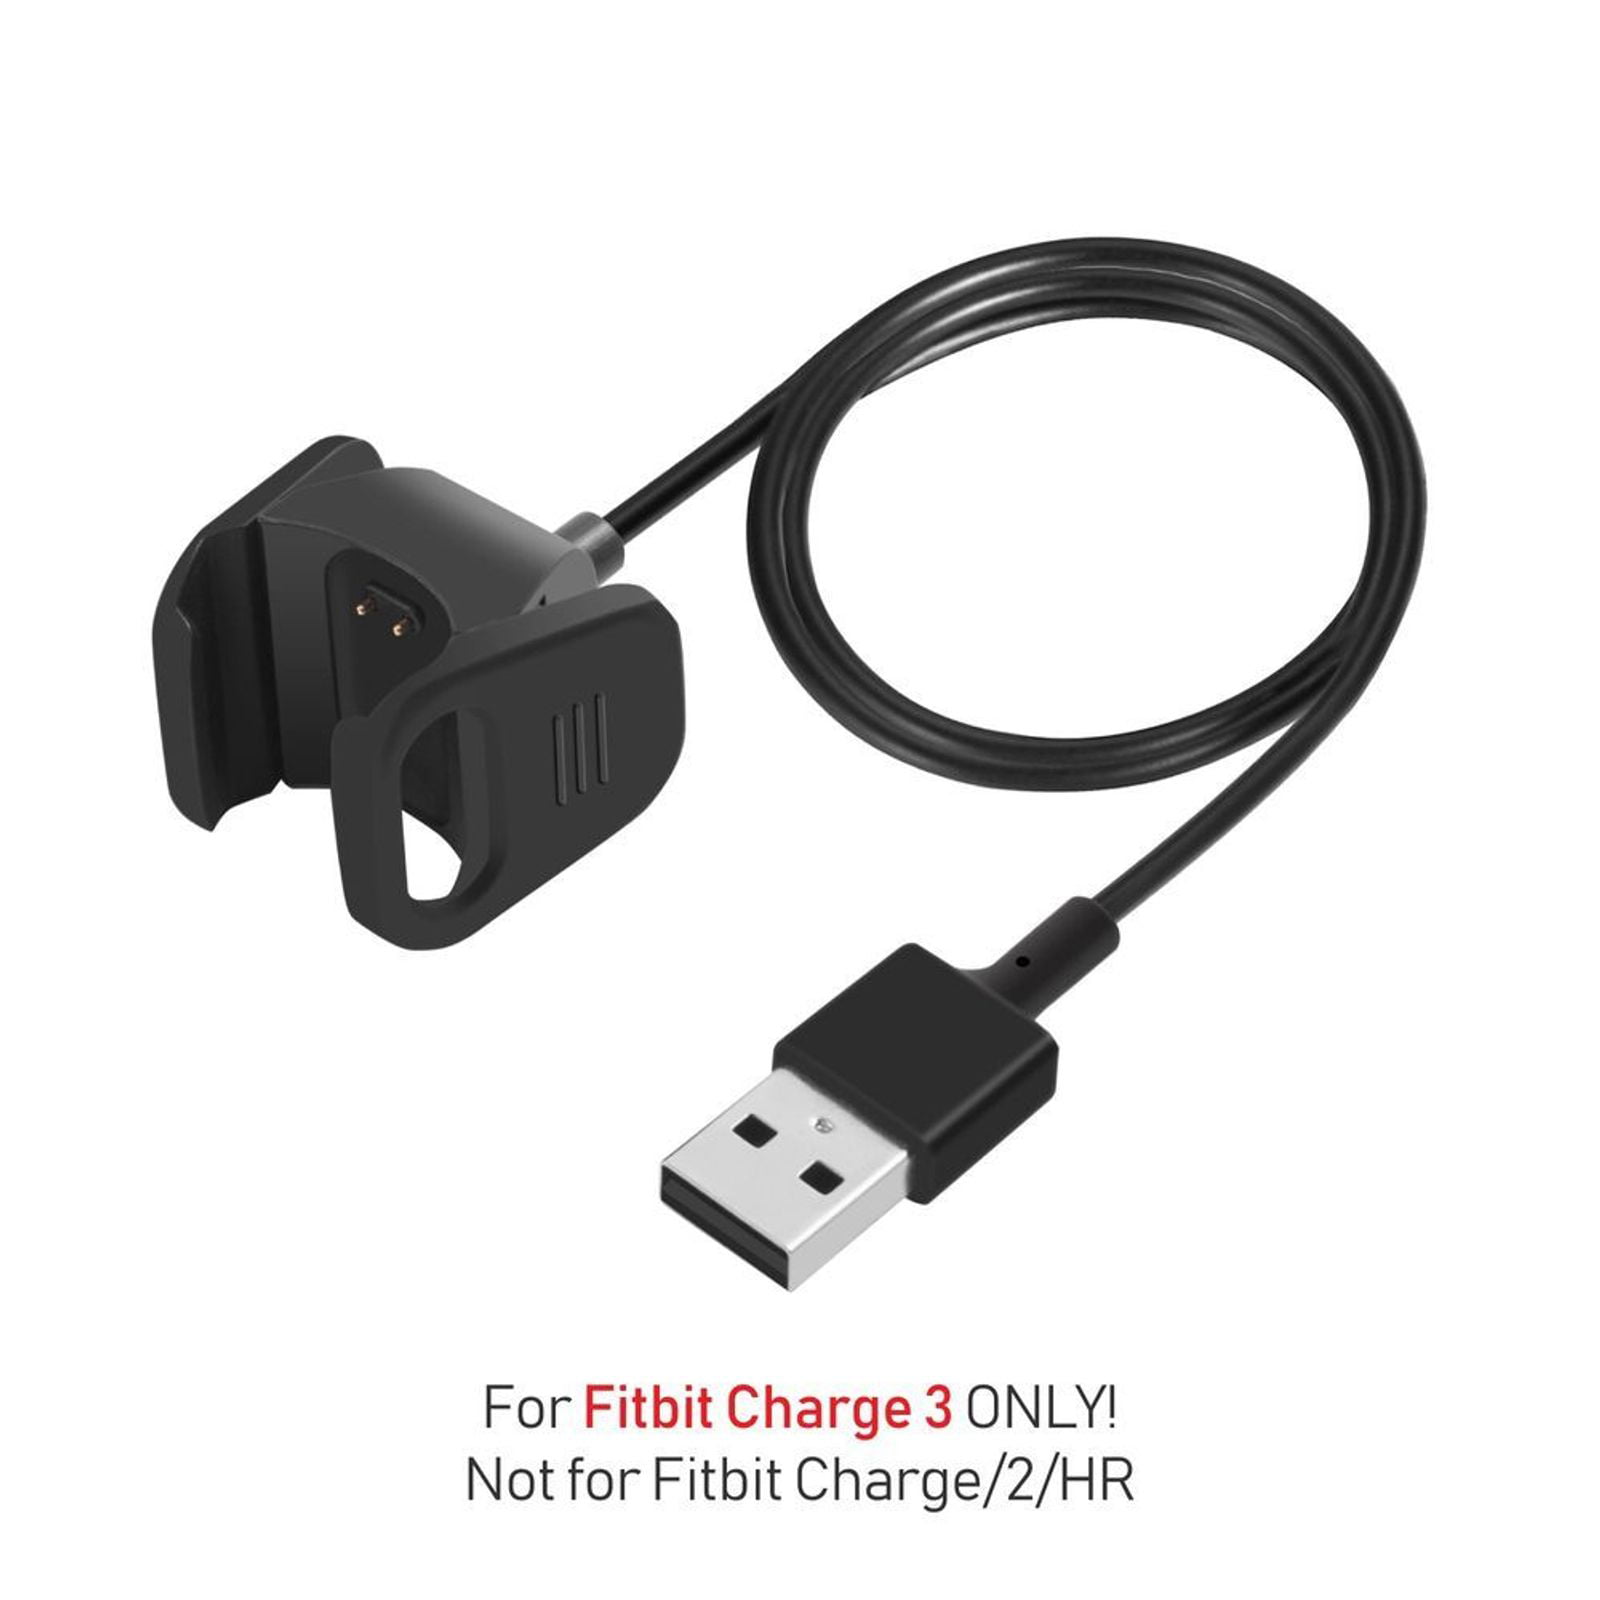 Fitbit Charge 3 Charger Cable 